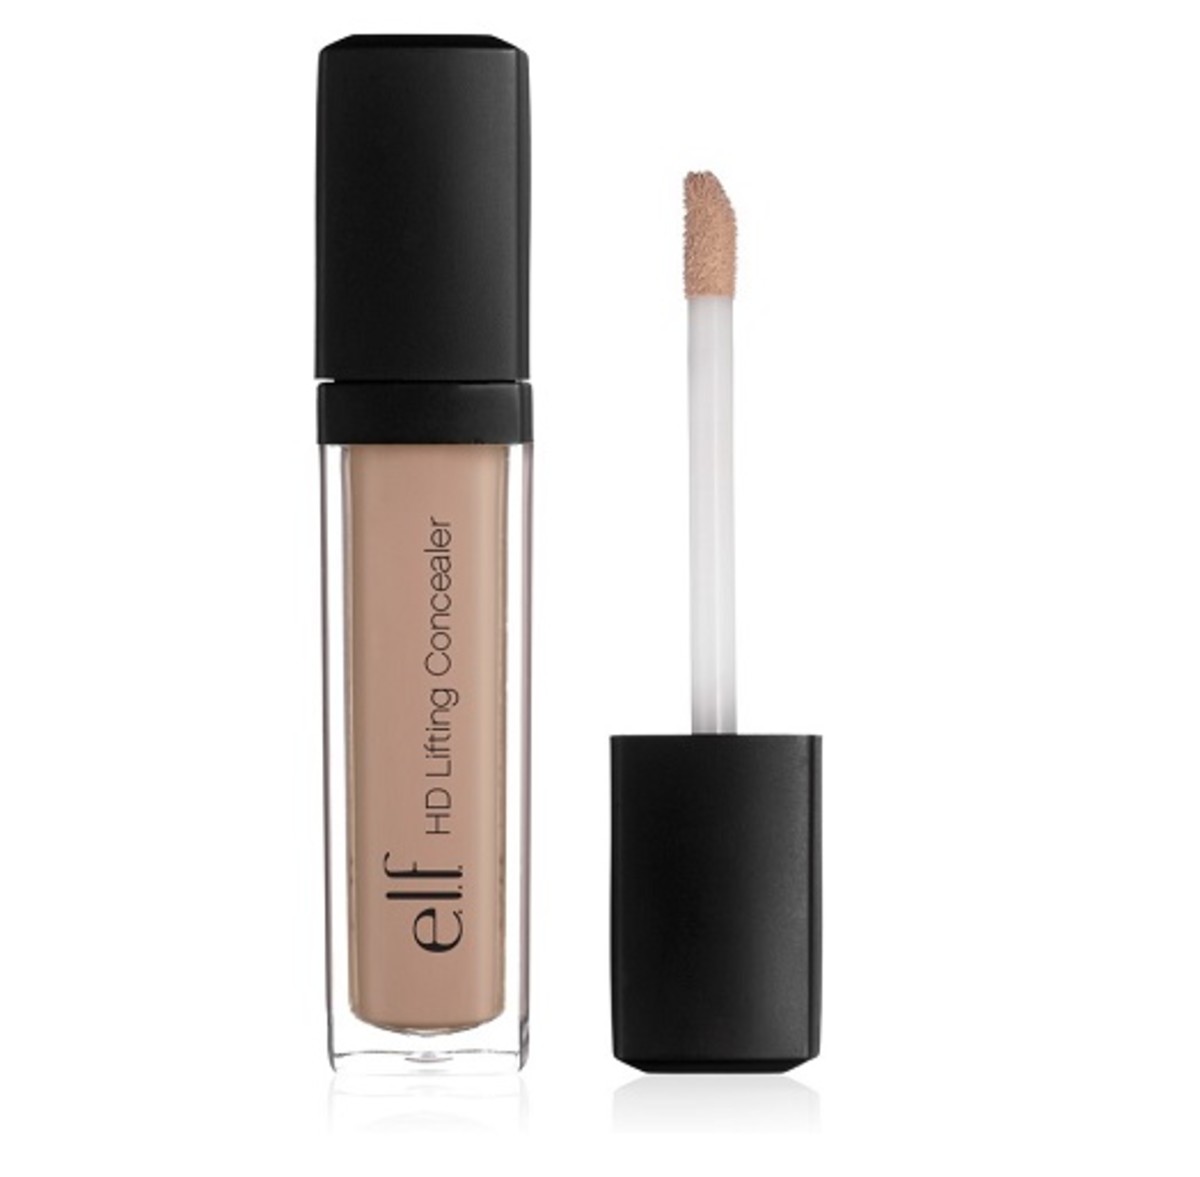 ELF HD lifting Concealer is inexpensive but has a limited range of shades.